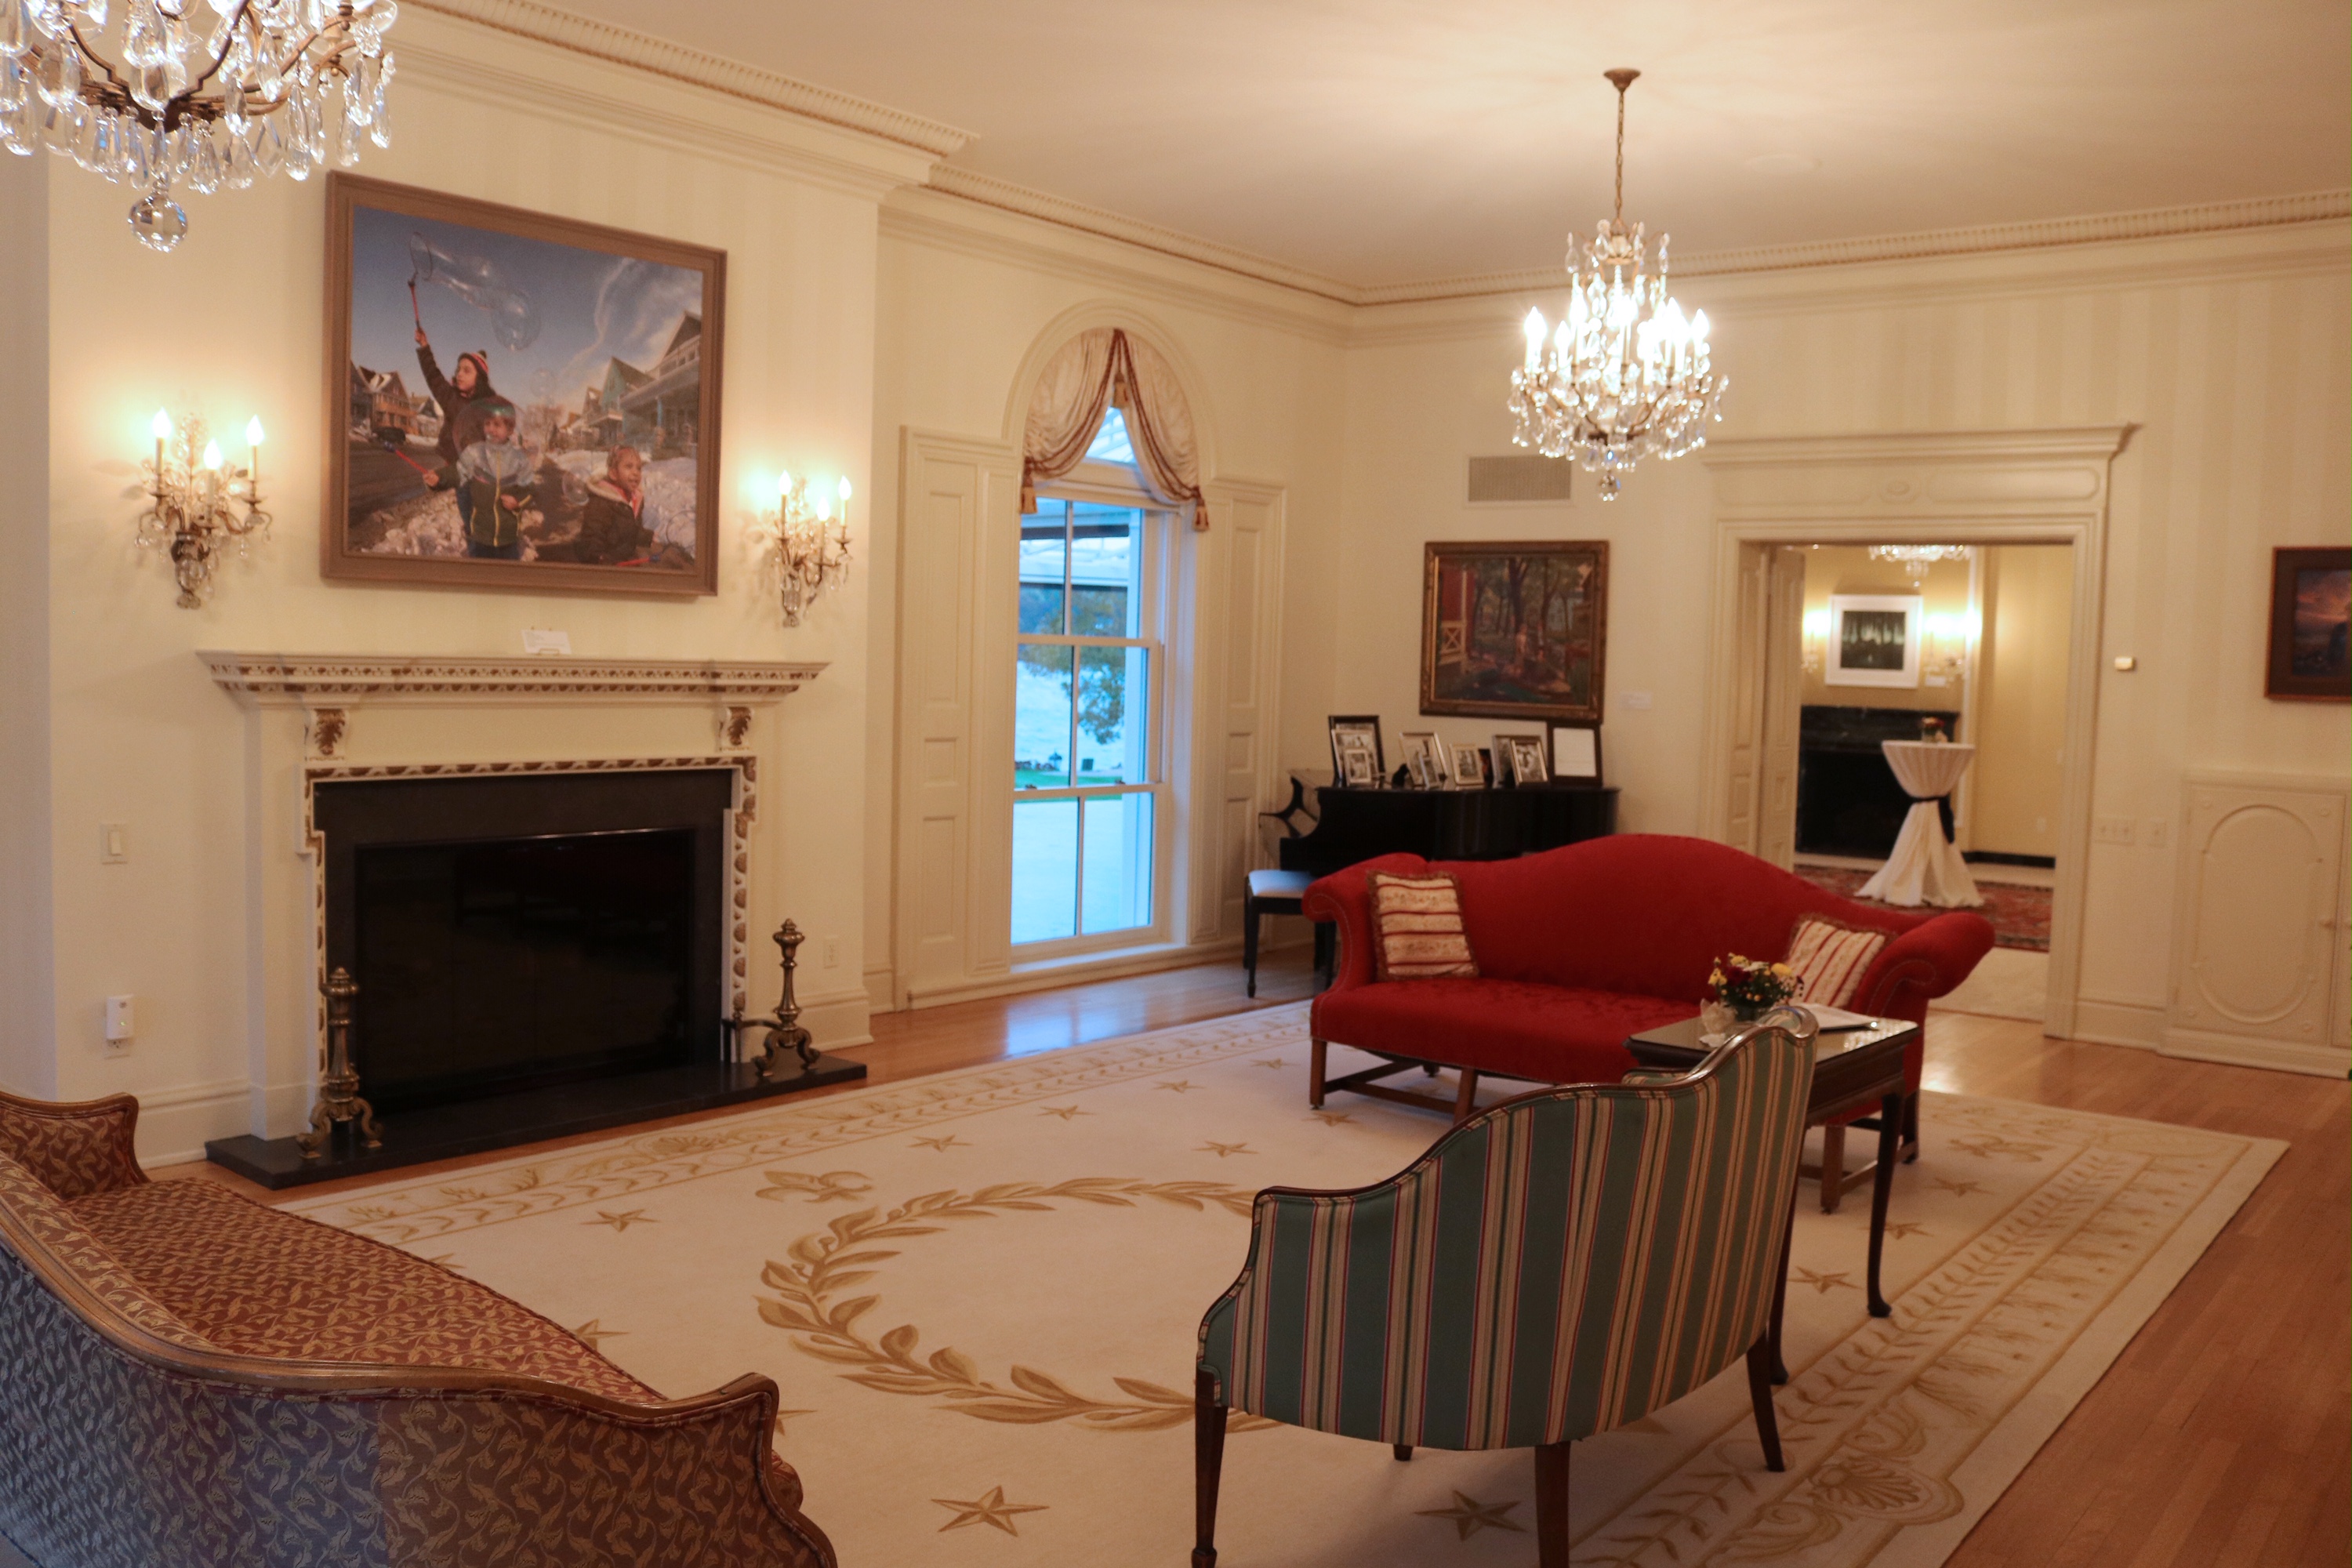 “Wishes in the Wind” by David Lenz is displayed in the Executive Residence. Photo courtesy of MOWA.